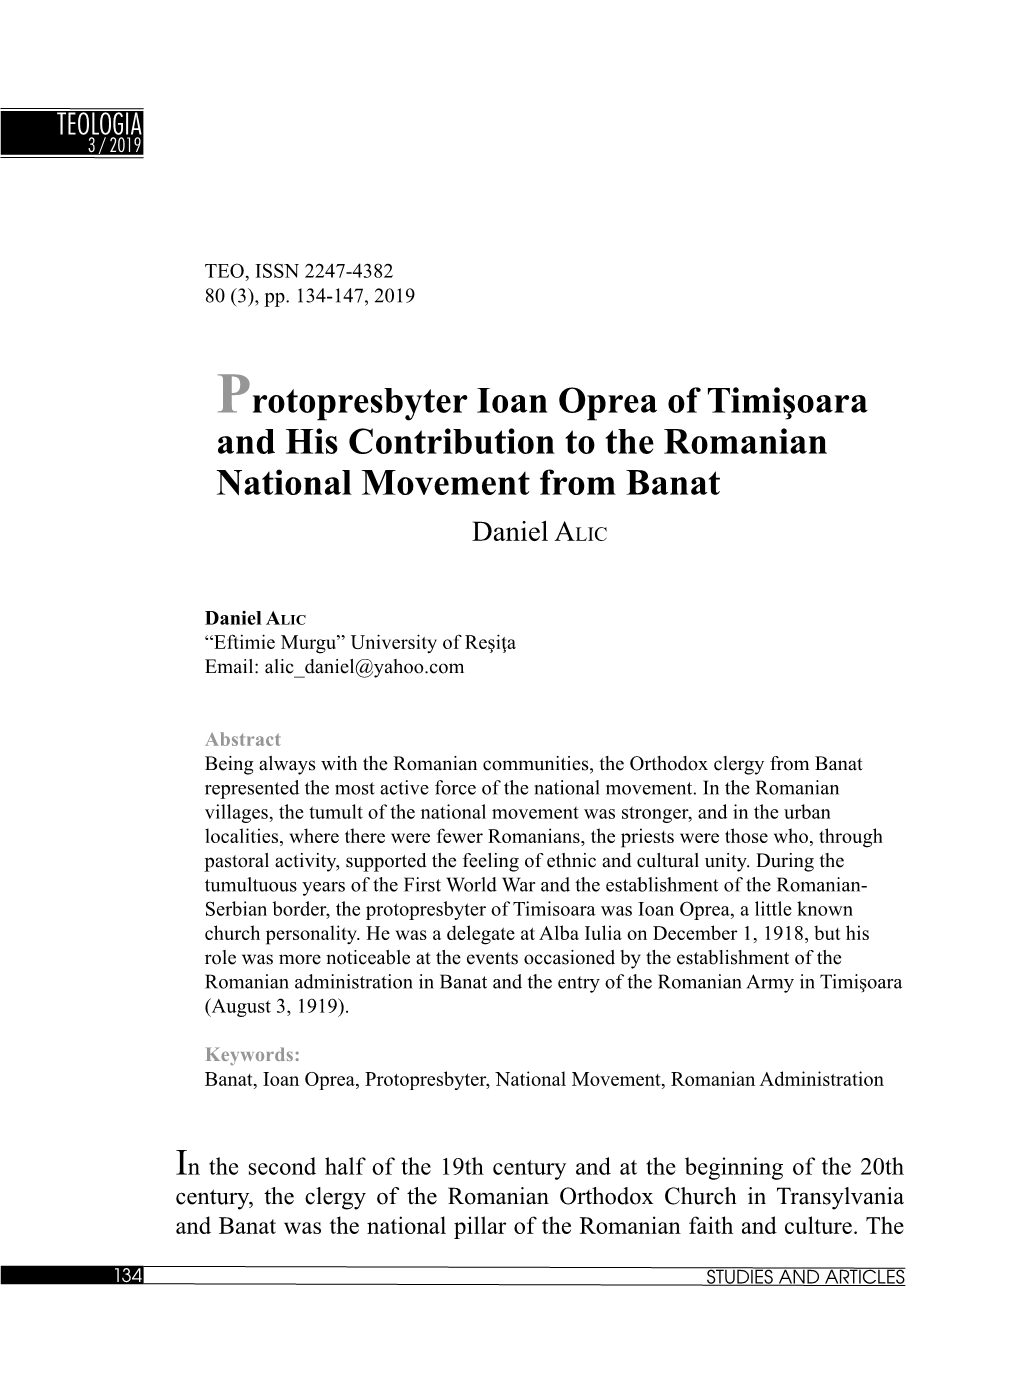 Protopresbyter Ioan Oprea of Timişoara and His Contribution to the Romanian National Movement from Banat